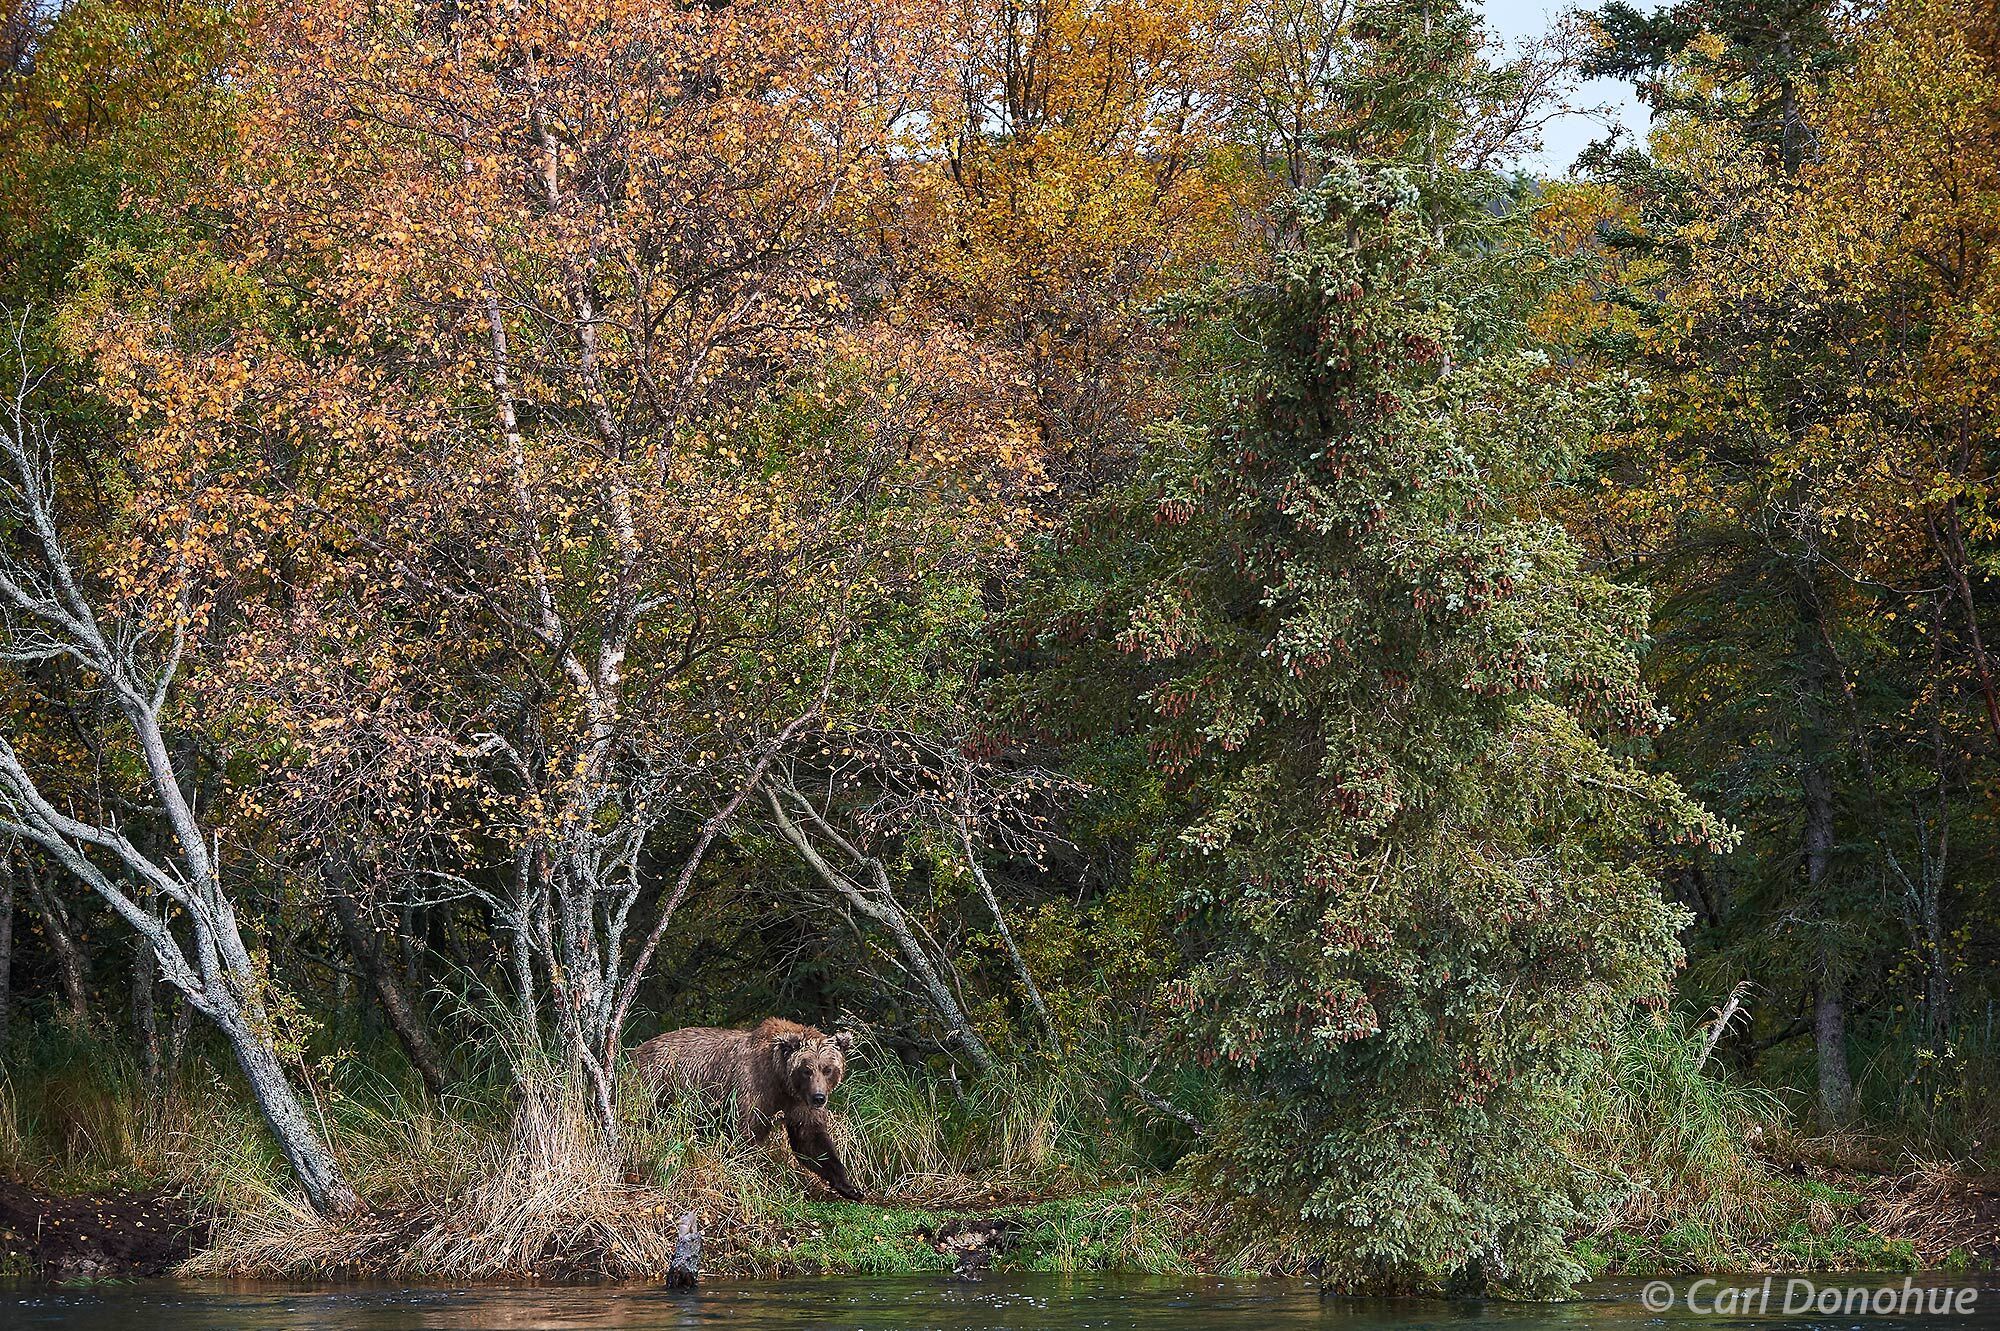 A young brown bear in the forest with gorgeous fall colors the cottonwood and birch trees.